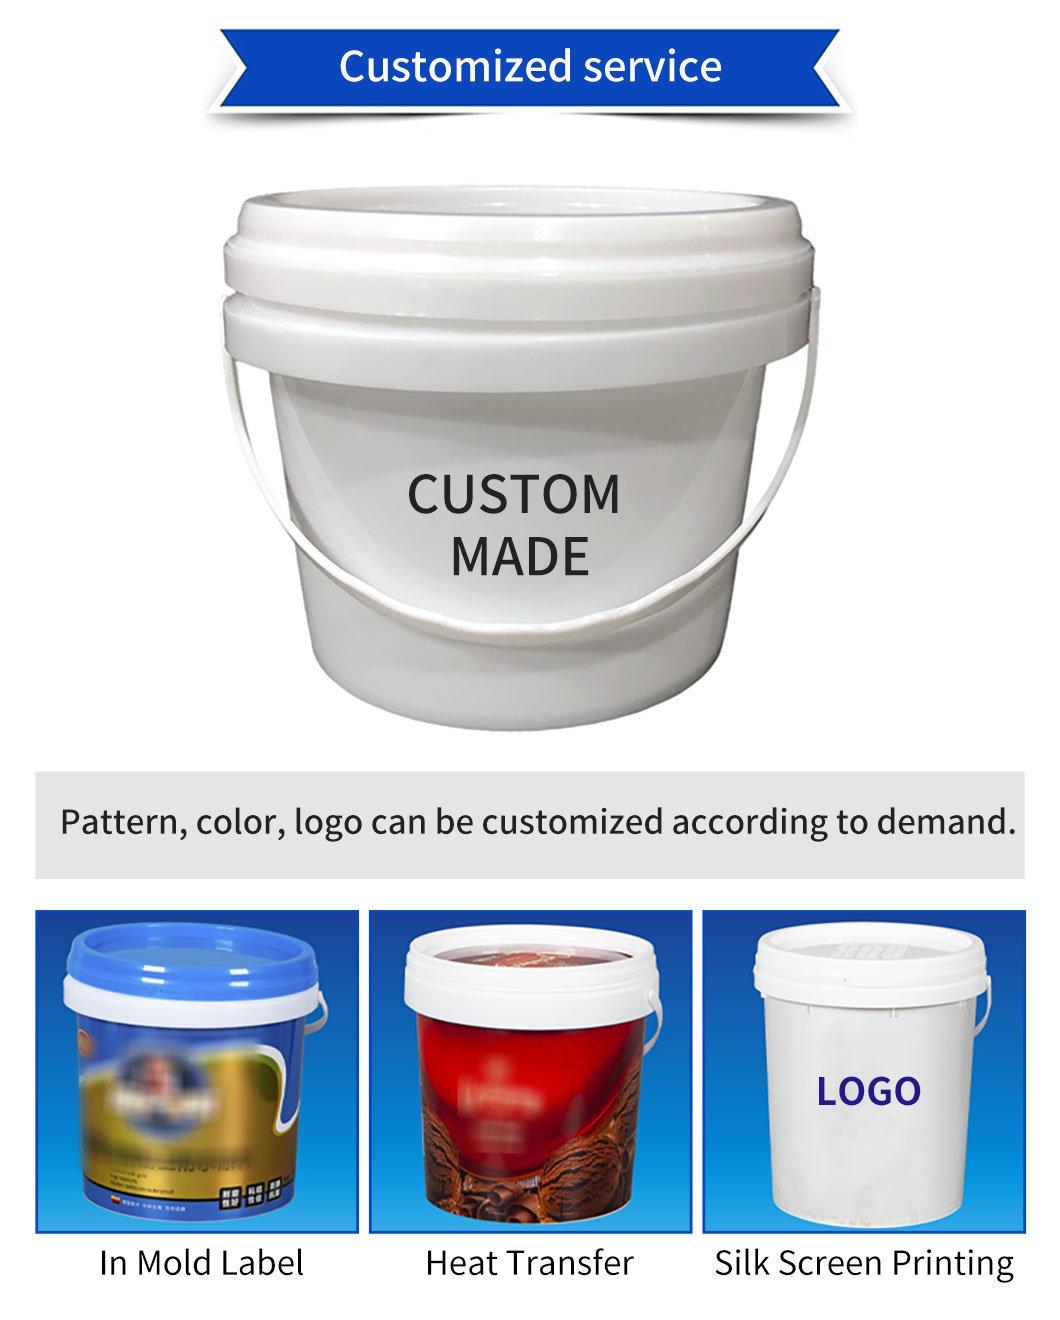 4L Clear Plastic Bucket and Transparent Pail with Lid